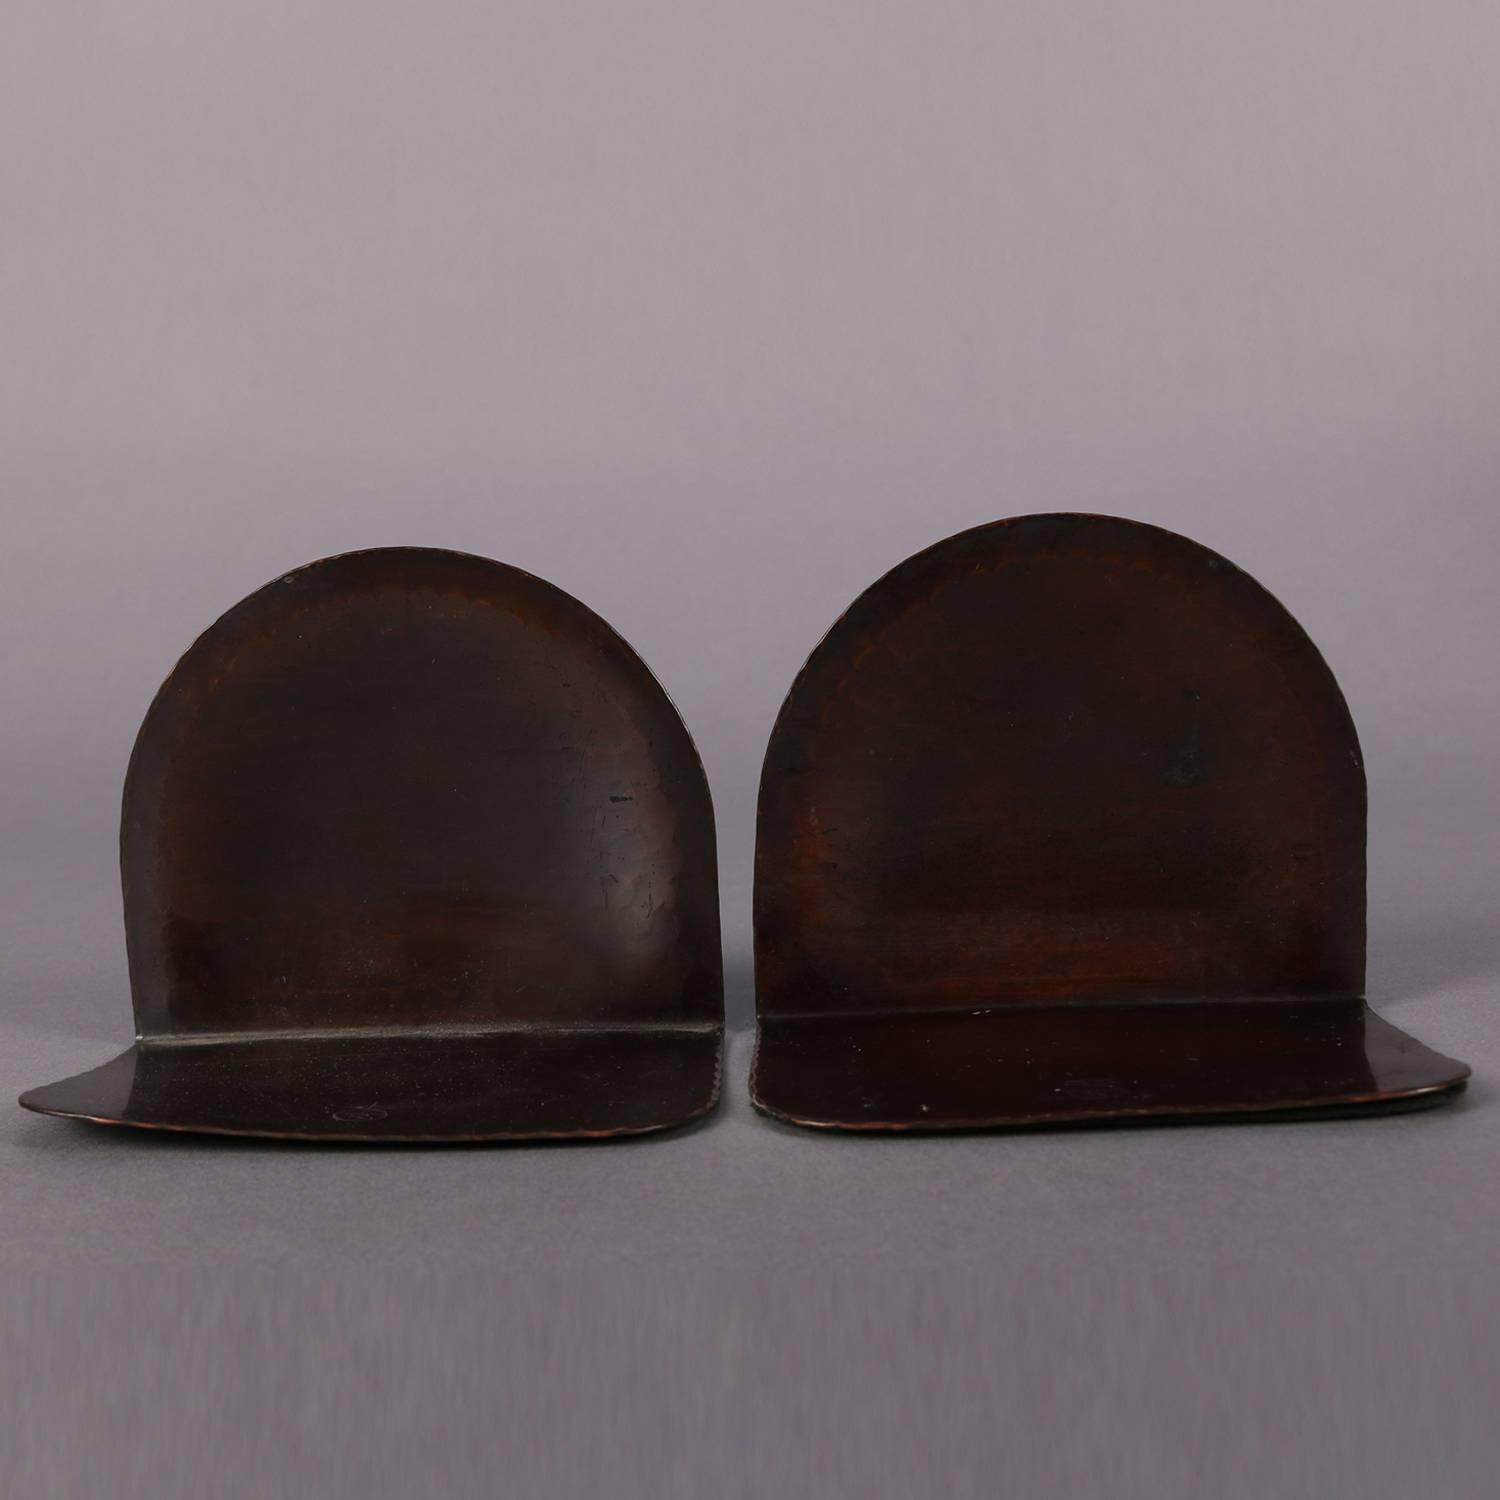 Hand-Crafted Pair of Arts & Crafts Roycroft Hand-Hammered Coppered Metal Bookends, circa 1910